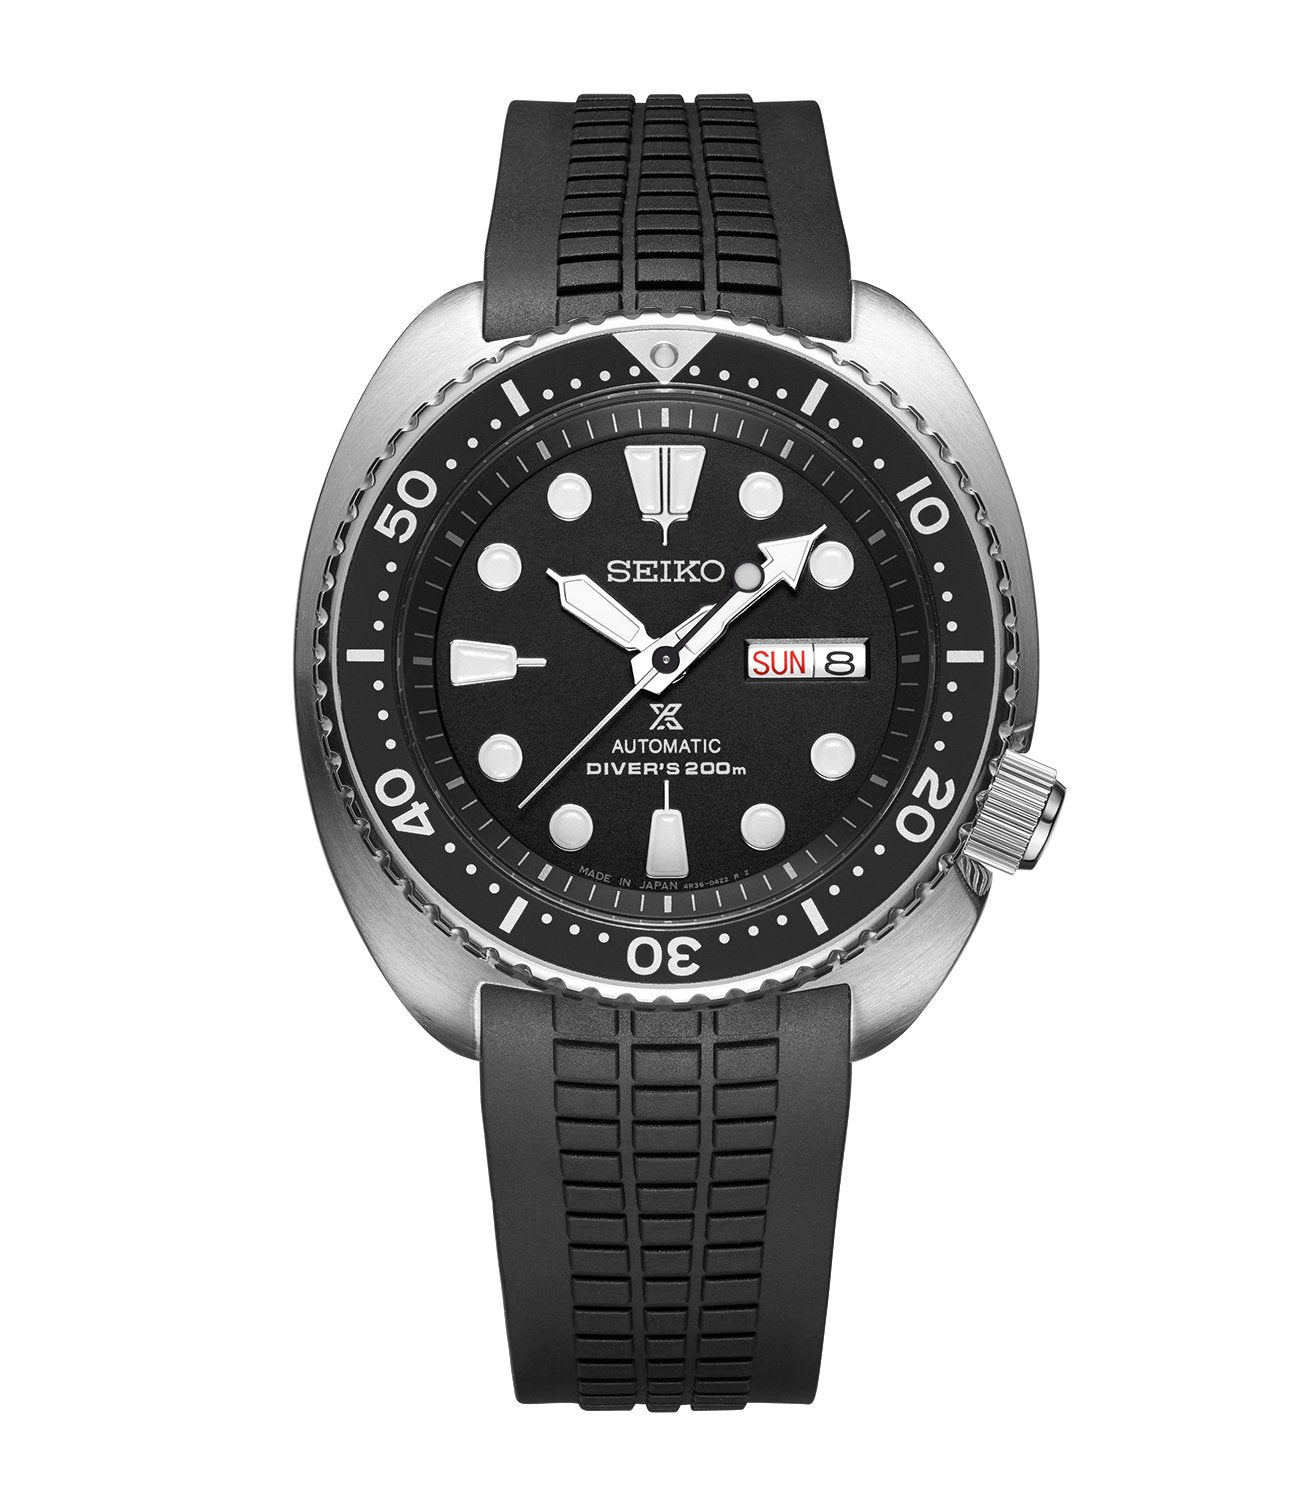 Give your Seiko SKX / Seiko Turtle a new life Crafter Blue's latest ed